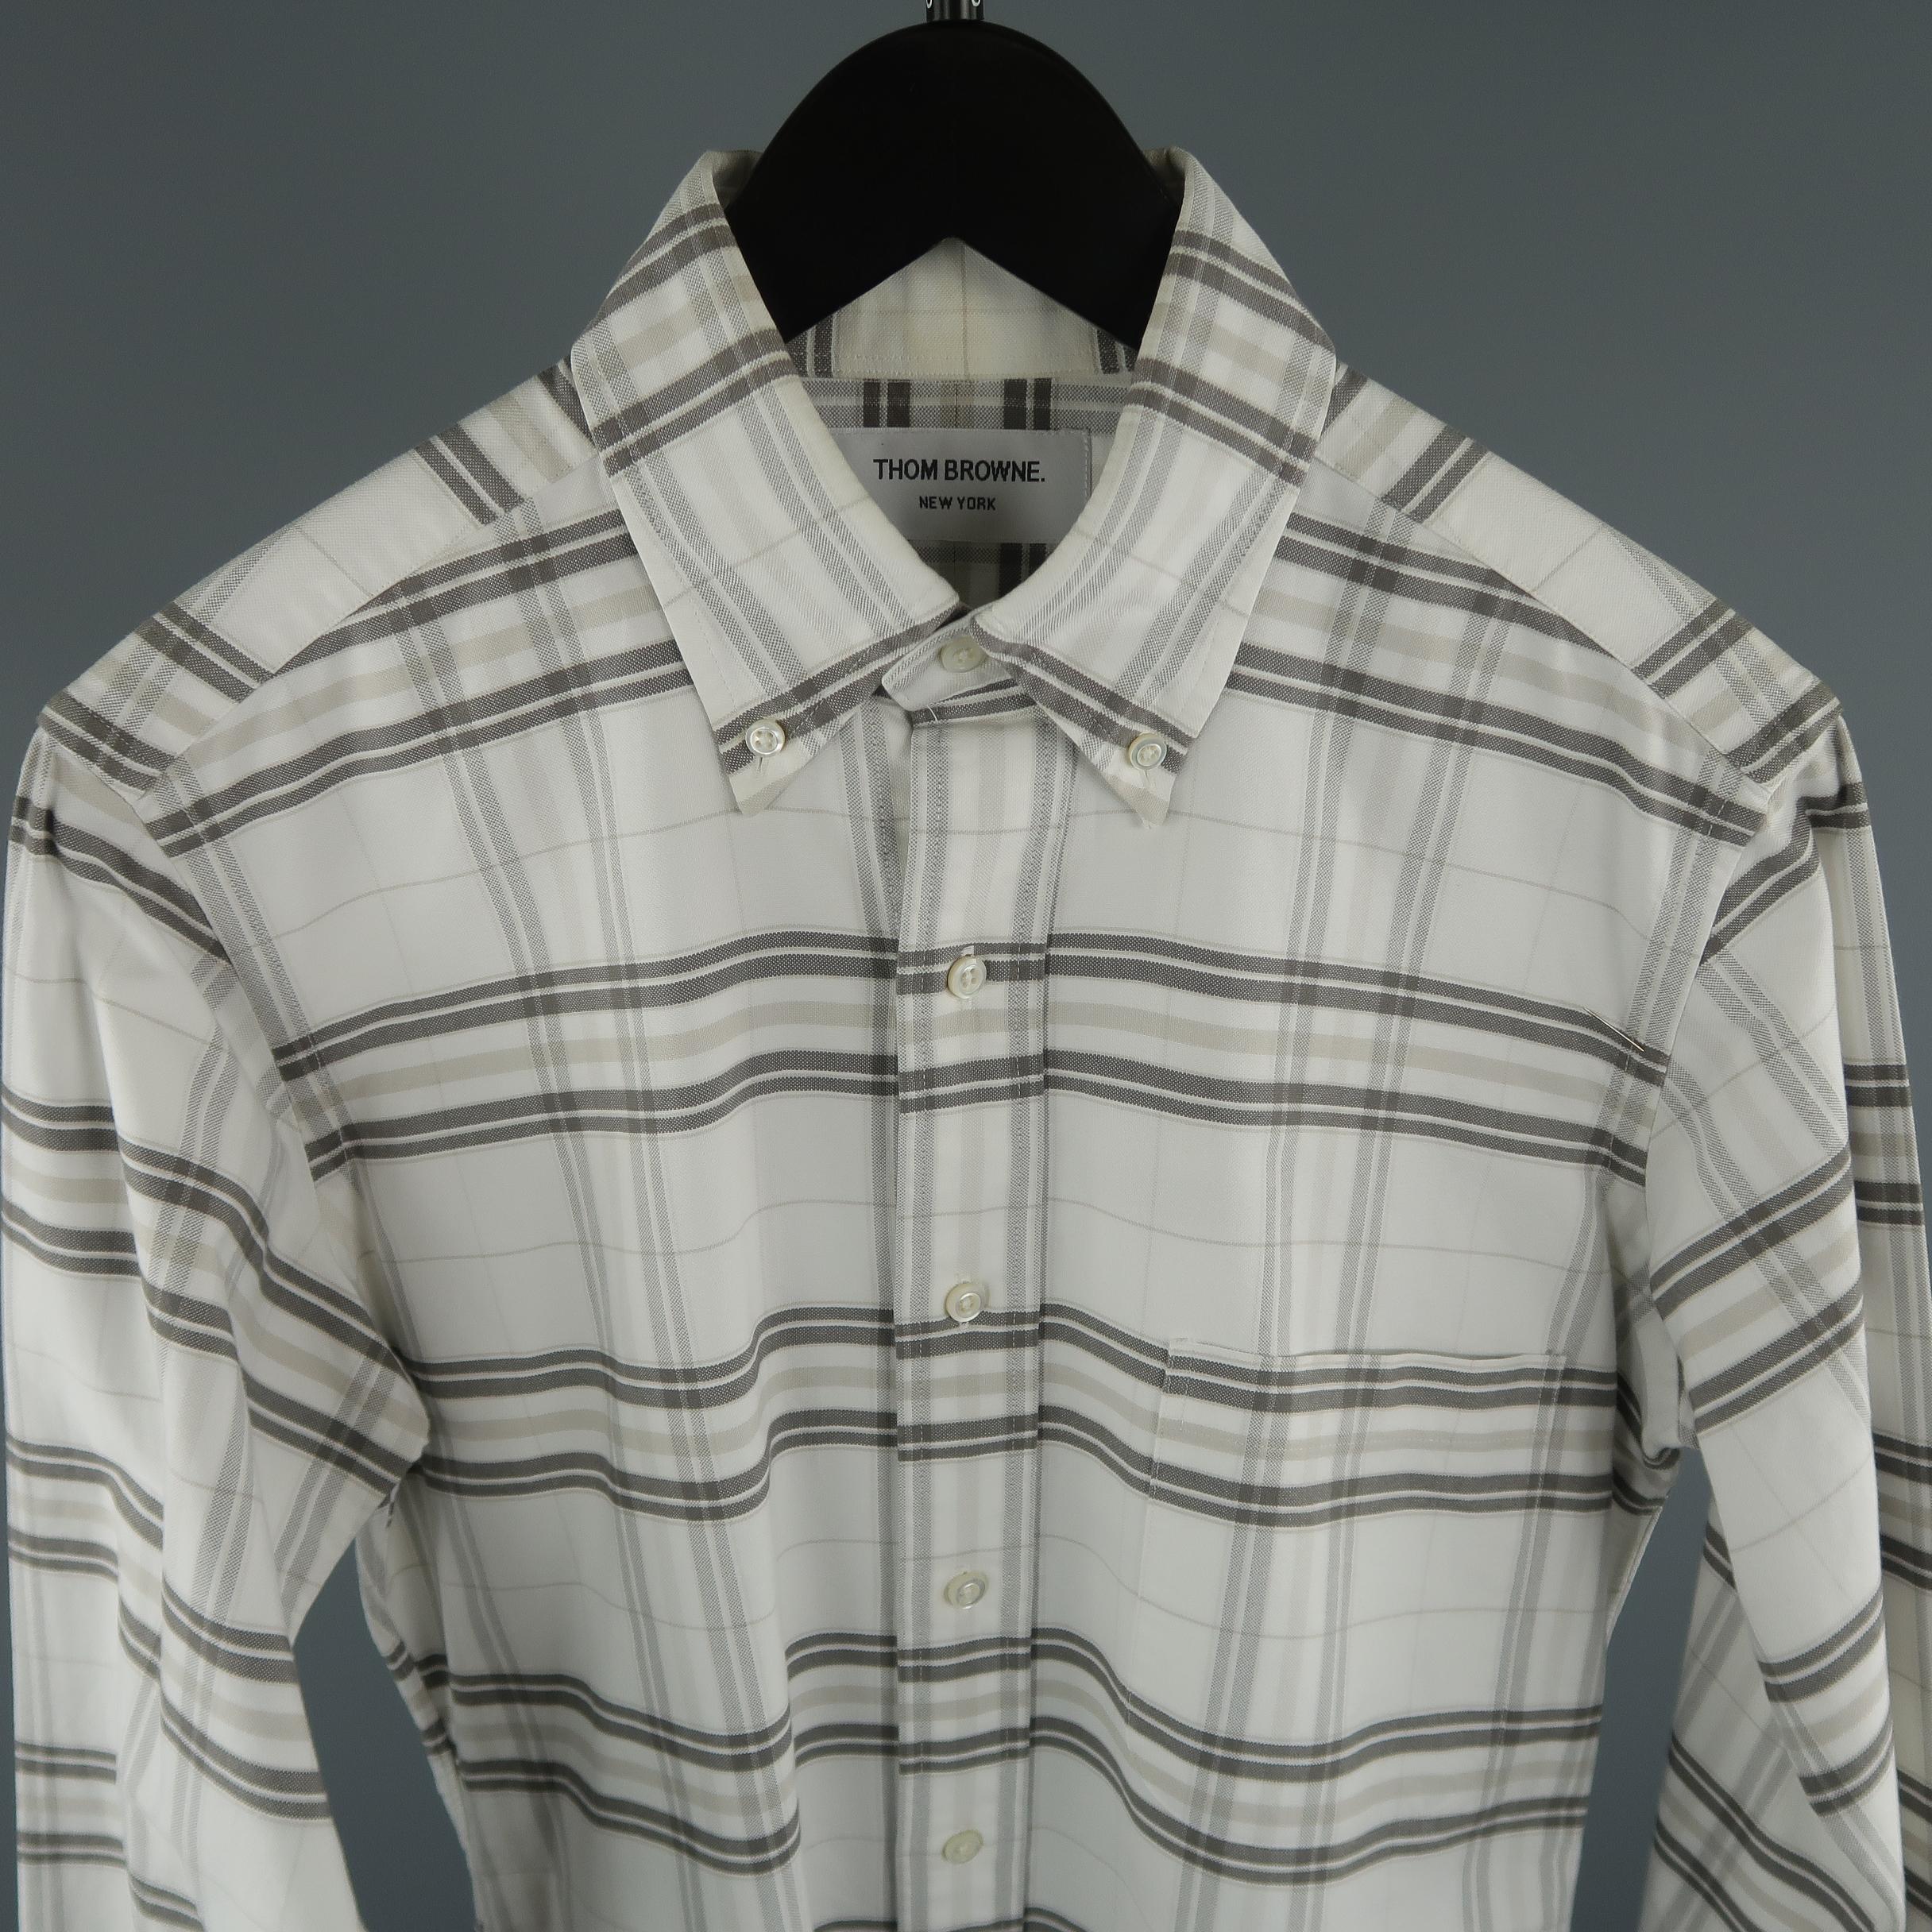 THOM BROWNE for BERGDORF GOODMAN shirt come in tones of white and grey, in a plaid cotton with a front patch pocket, button down collar and long sleeves. Presenting a very light stain inside the collar. Made in USA.
 
Excellent  Pre-Owned